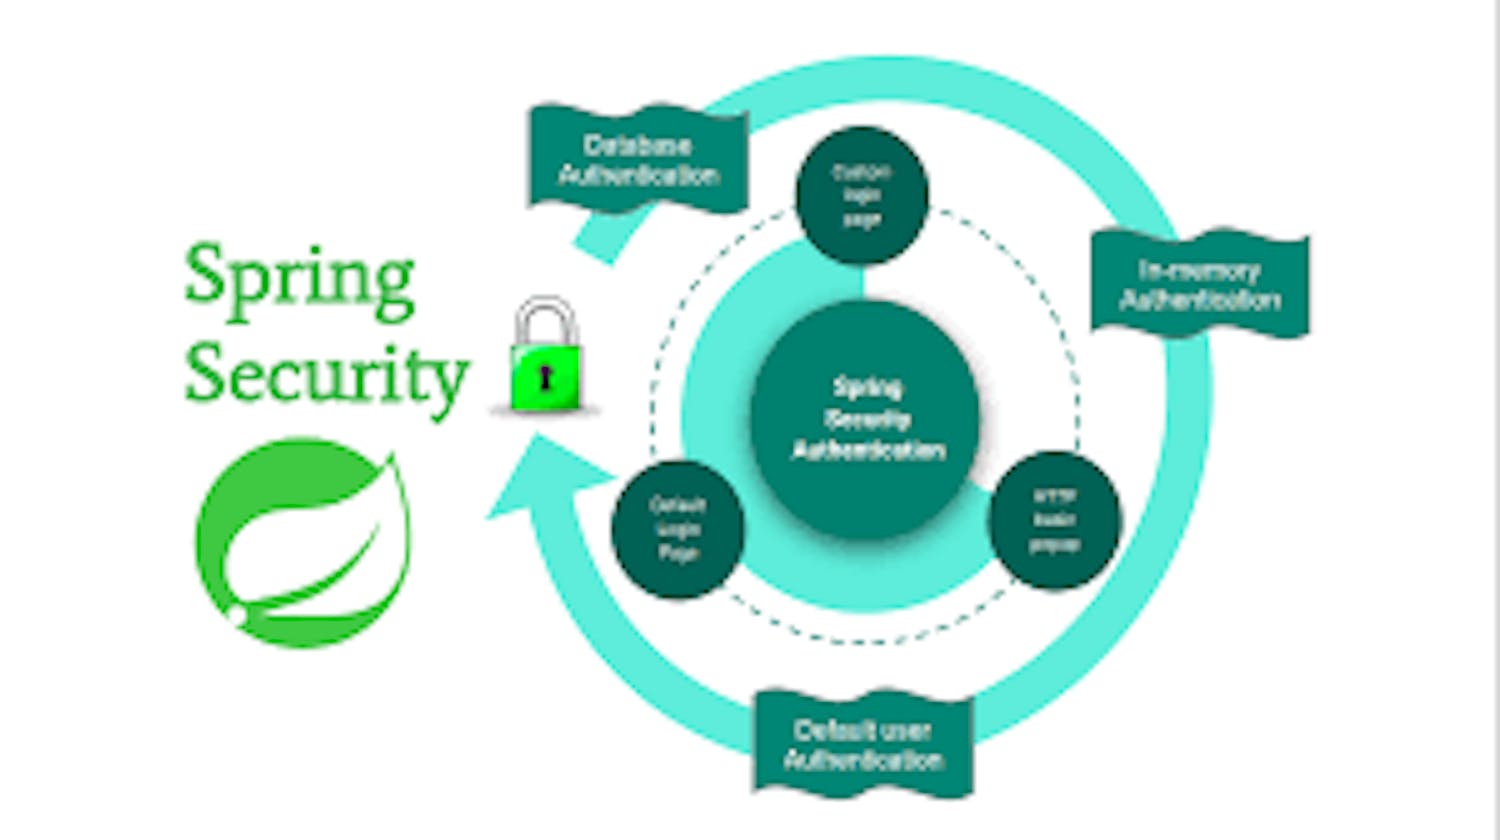 Spring Security Basics: A Simple Guide for Newbies